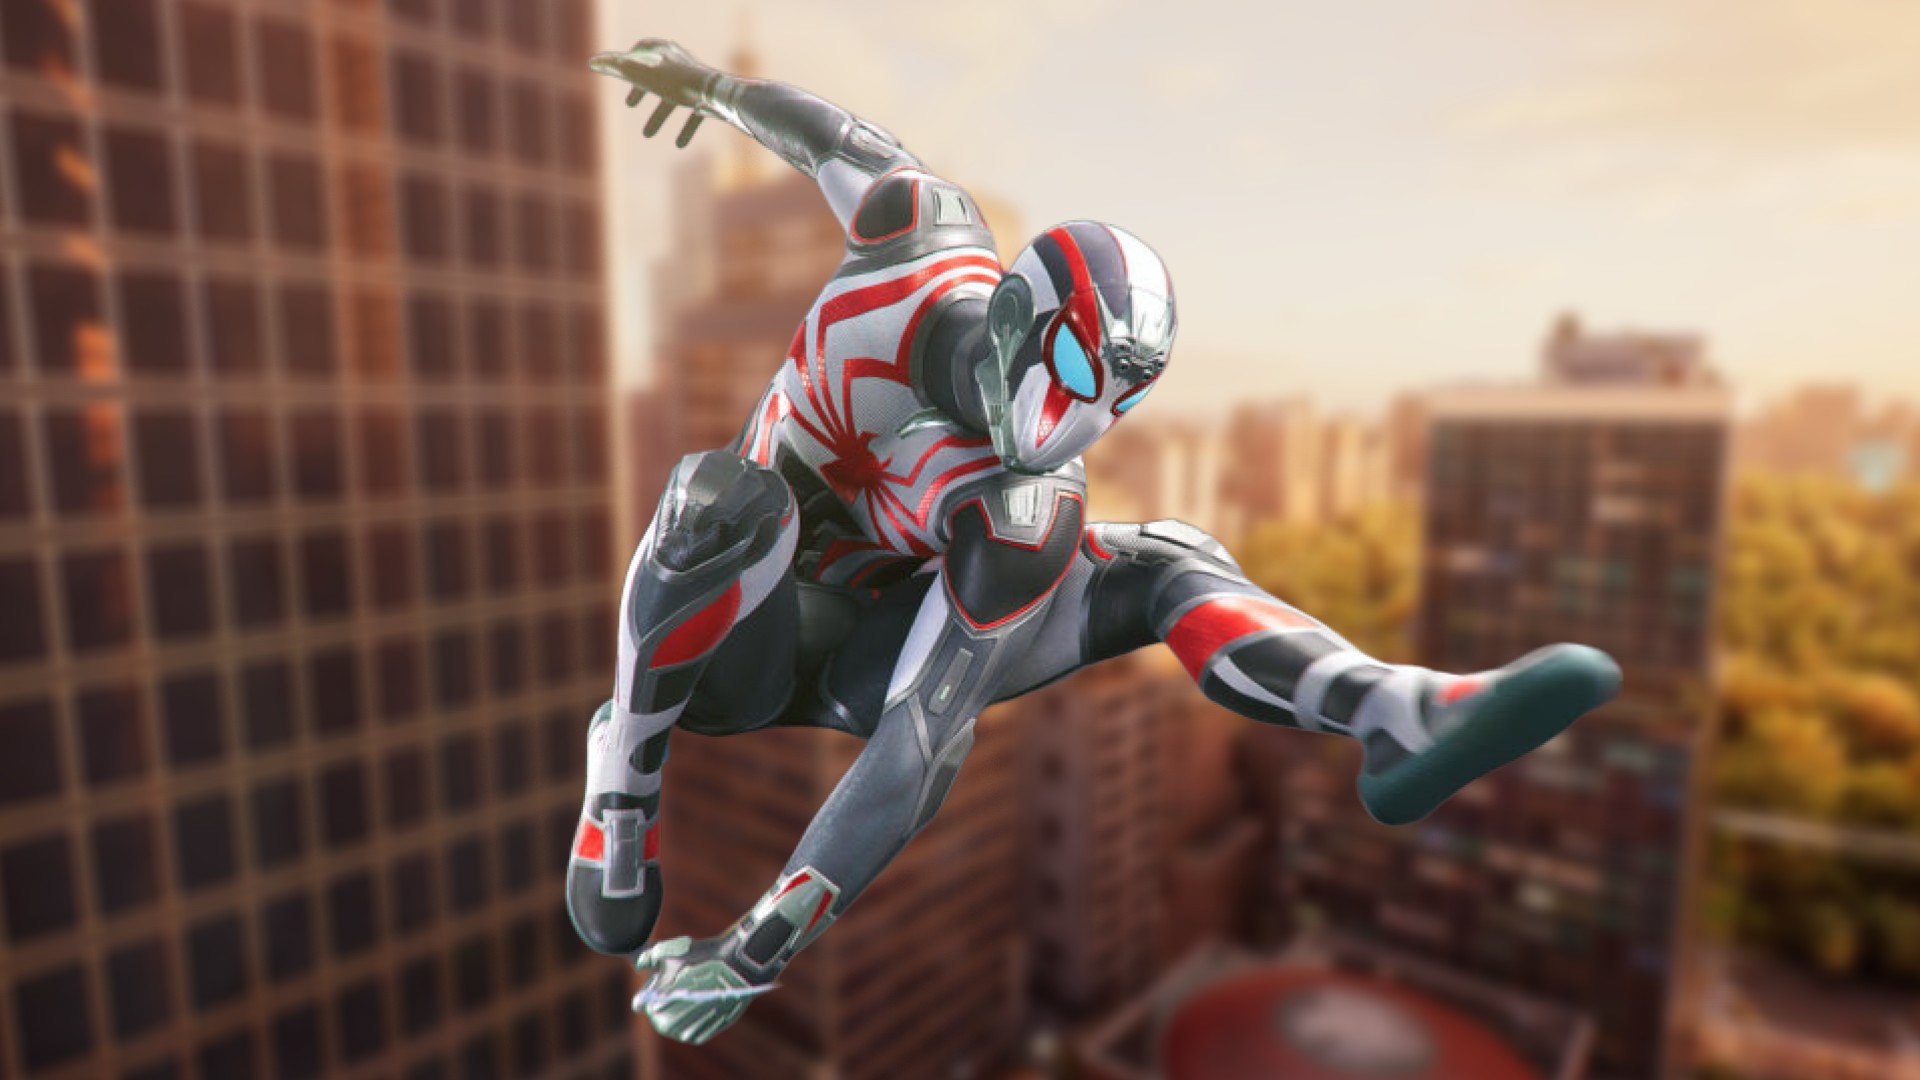 The seven best Spider-Man games to play after seeing No Way Home